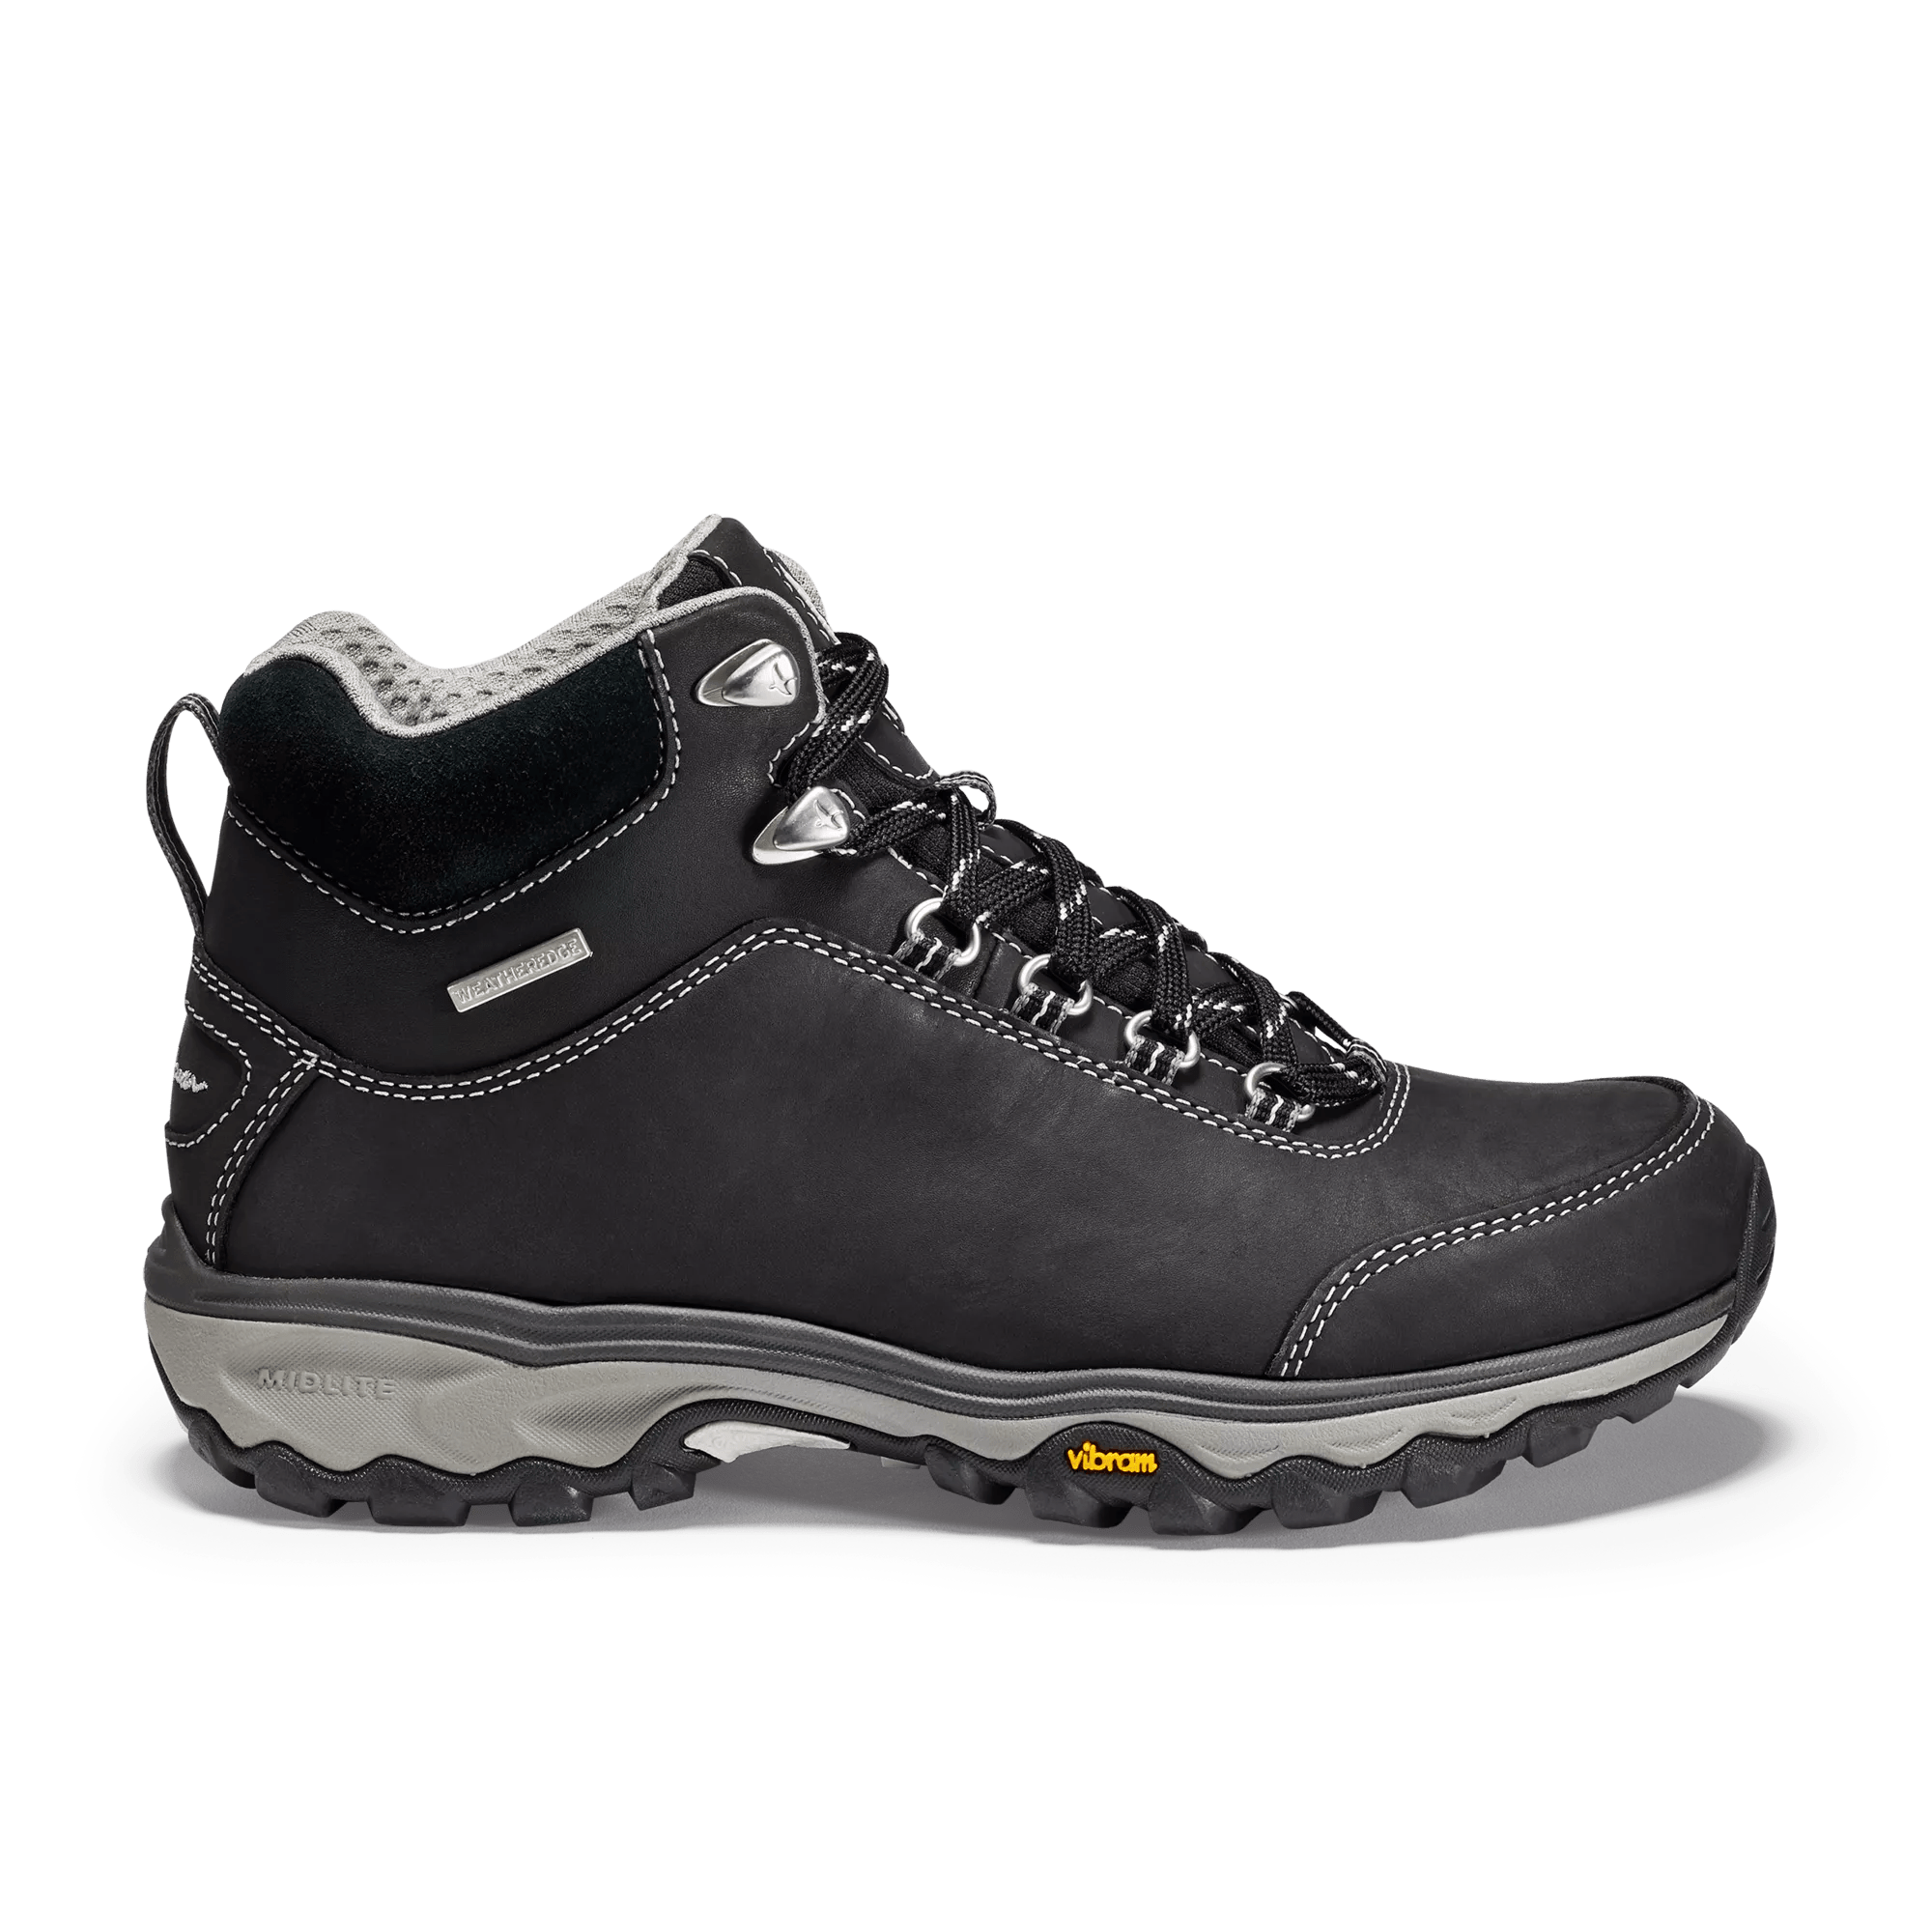 Cairn Mid Hiking Boots